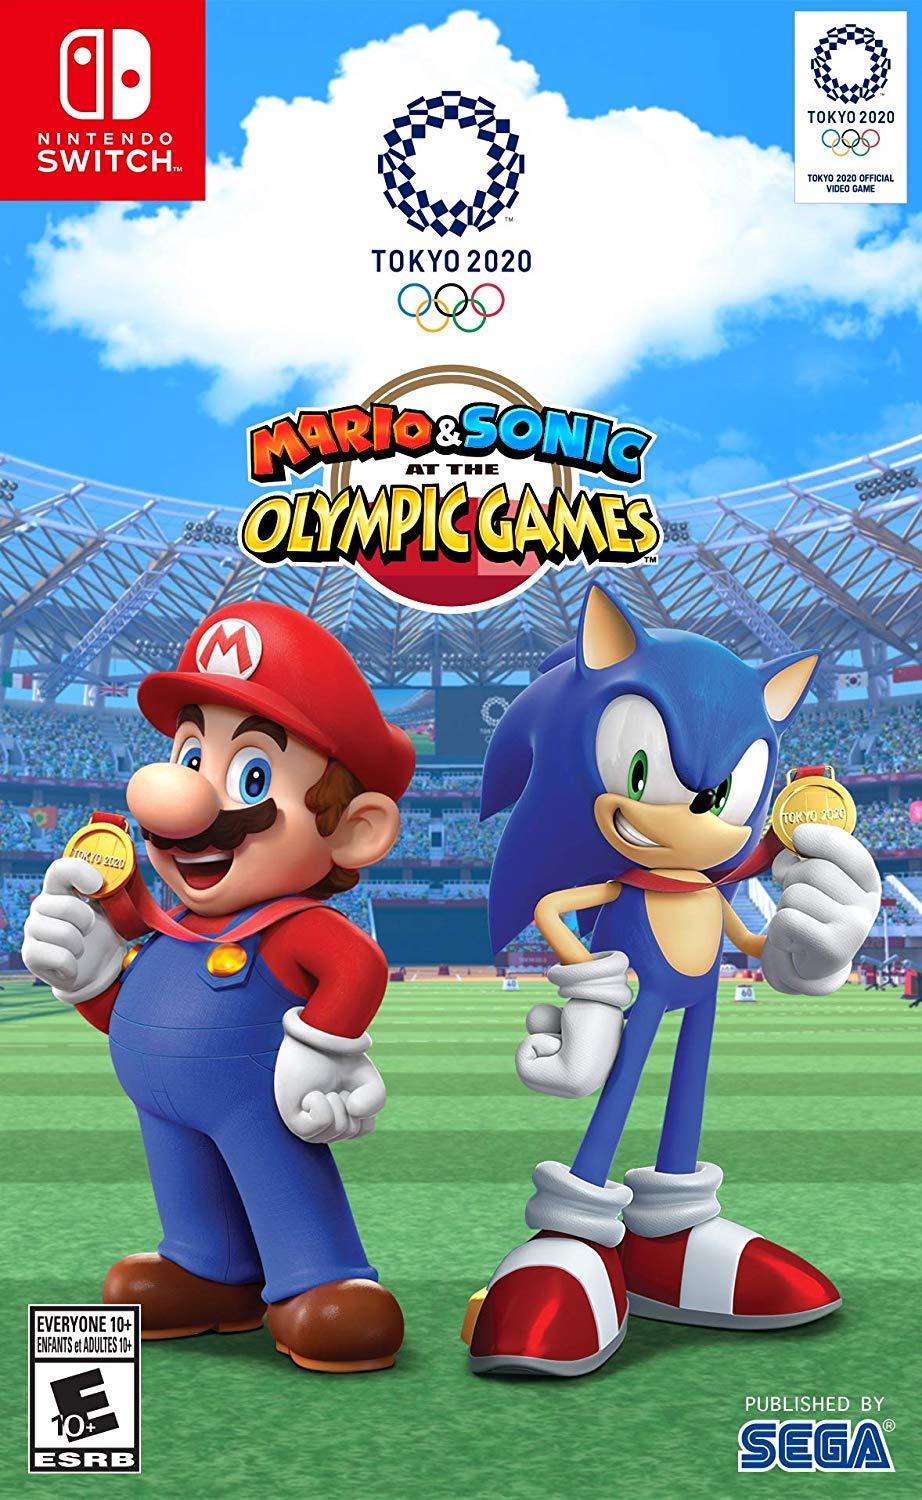 Mario & Sonic at the Olympic Games Tokyo 2020 demo out now